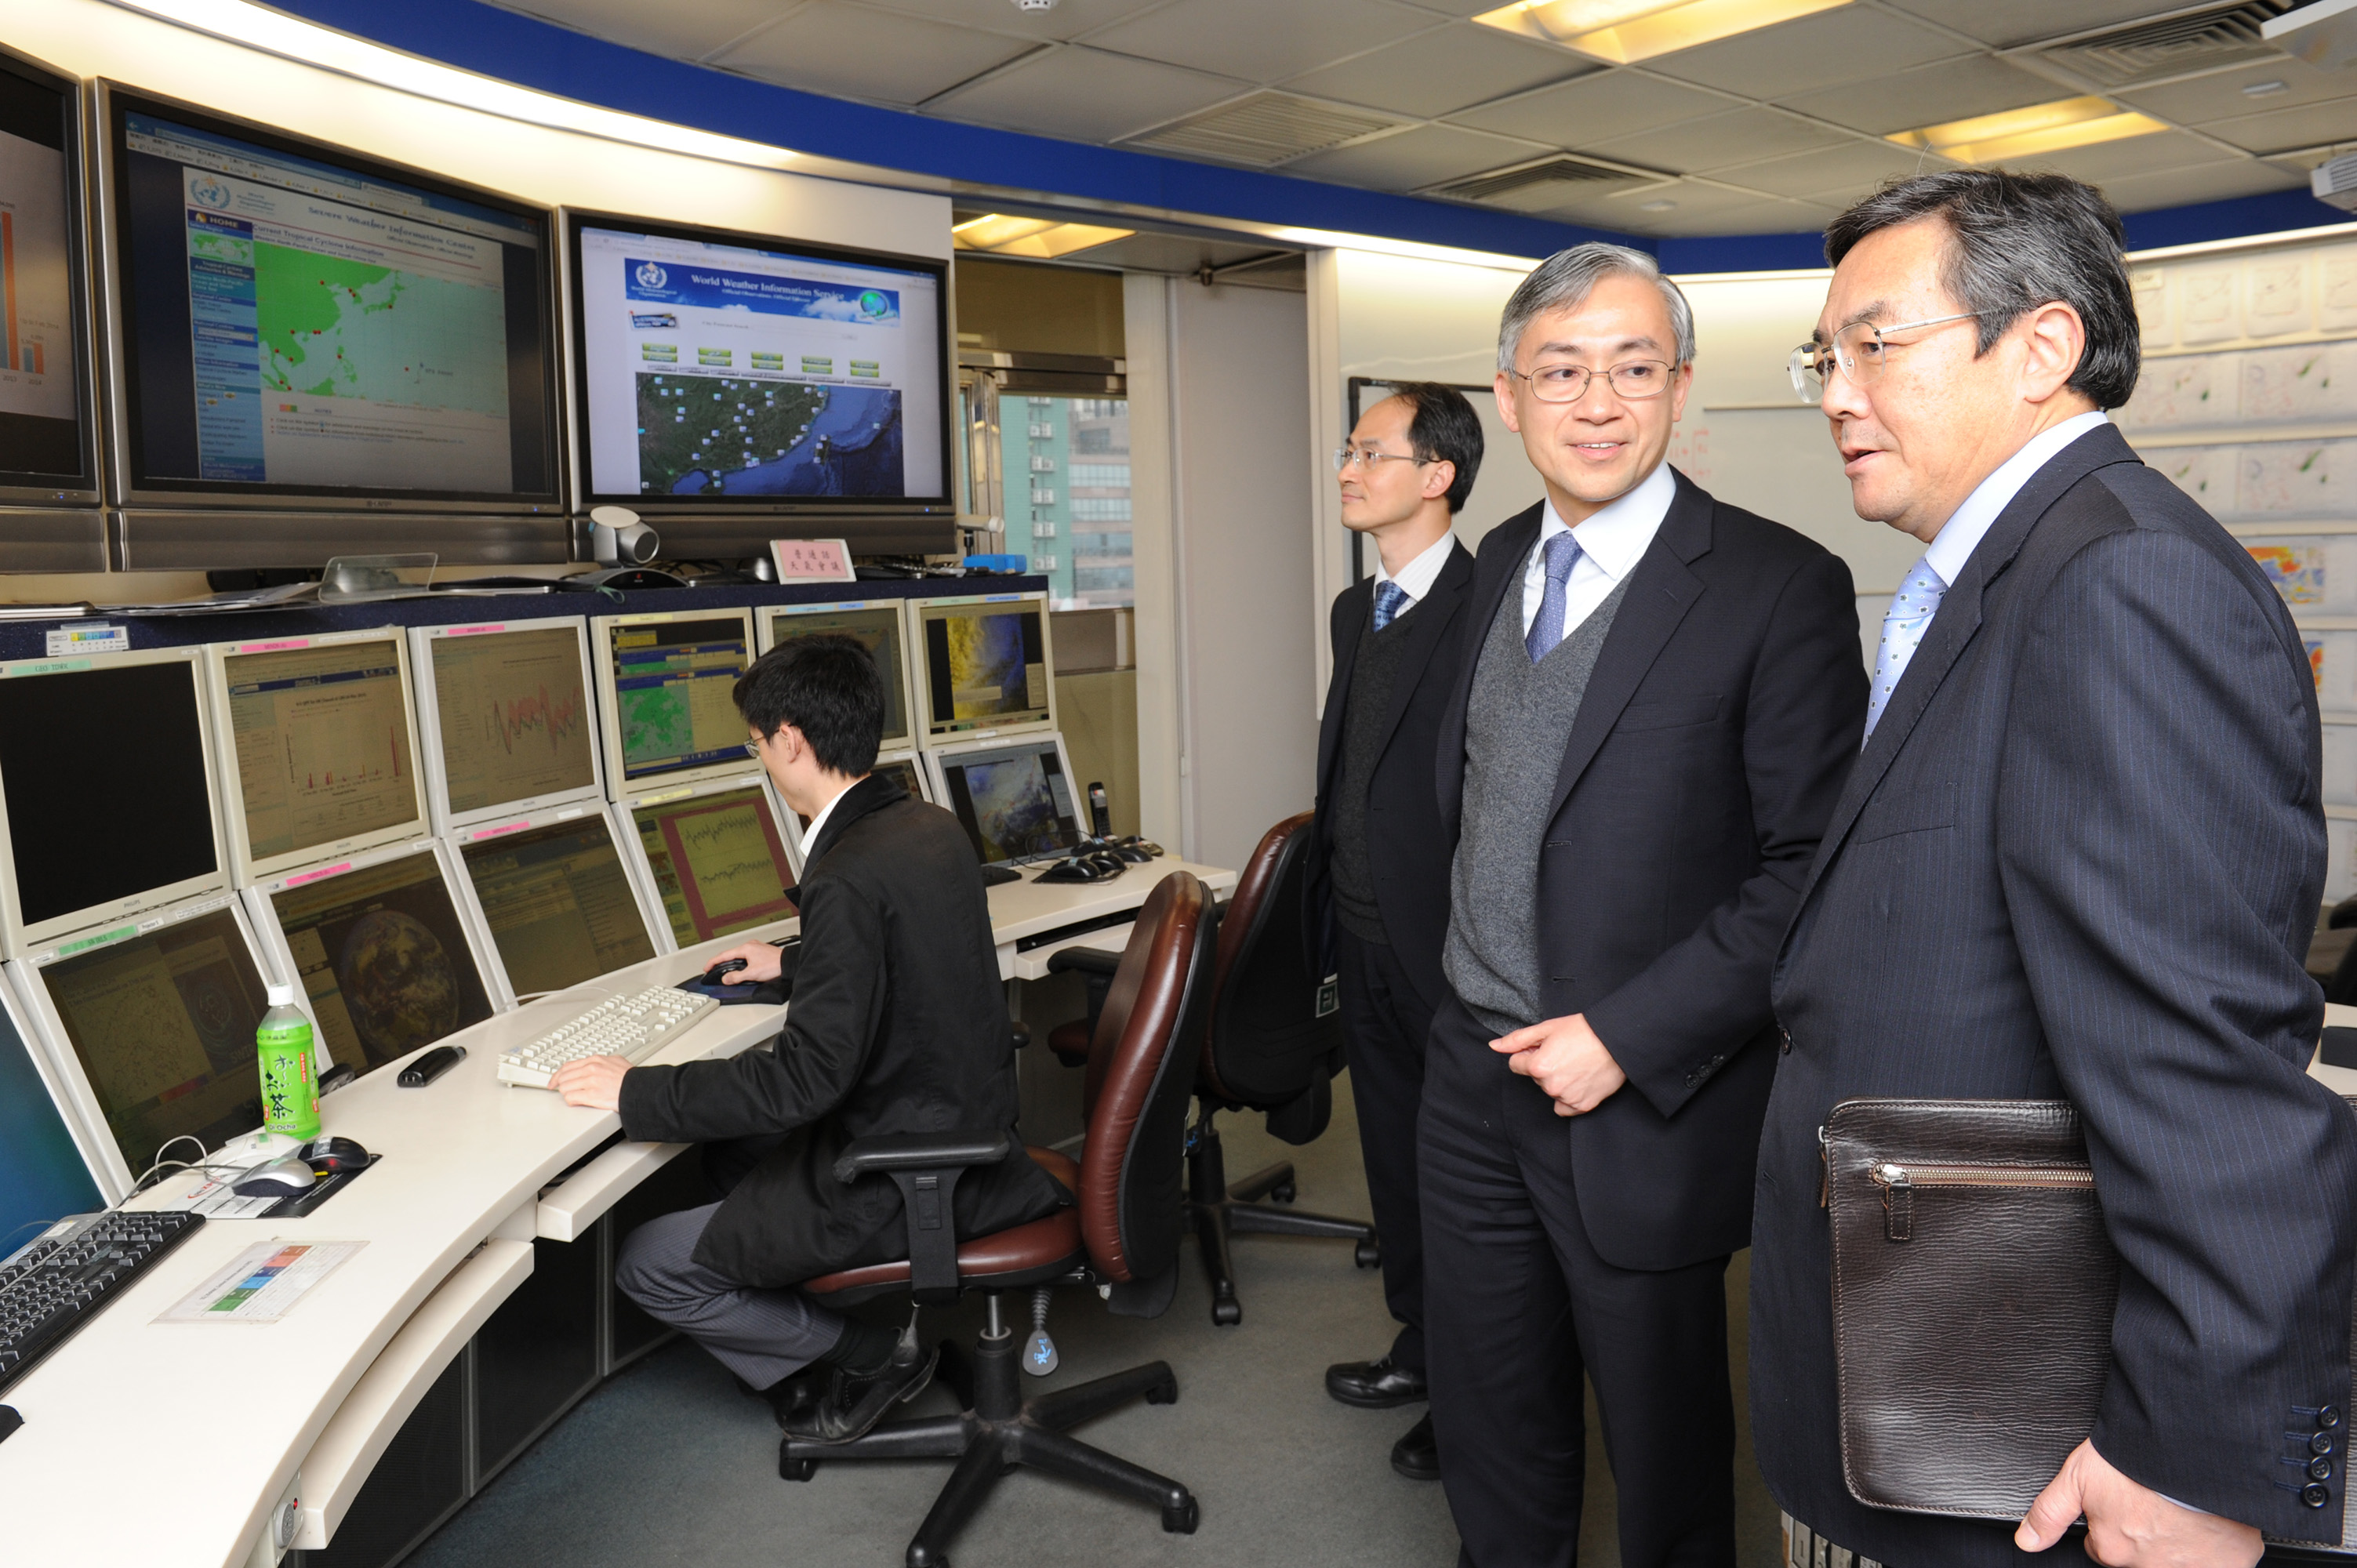 Mr SEKIMIZU (right) was shown the operational facilities at the Central Forecasting Office.